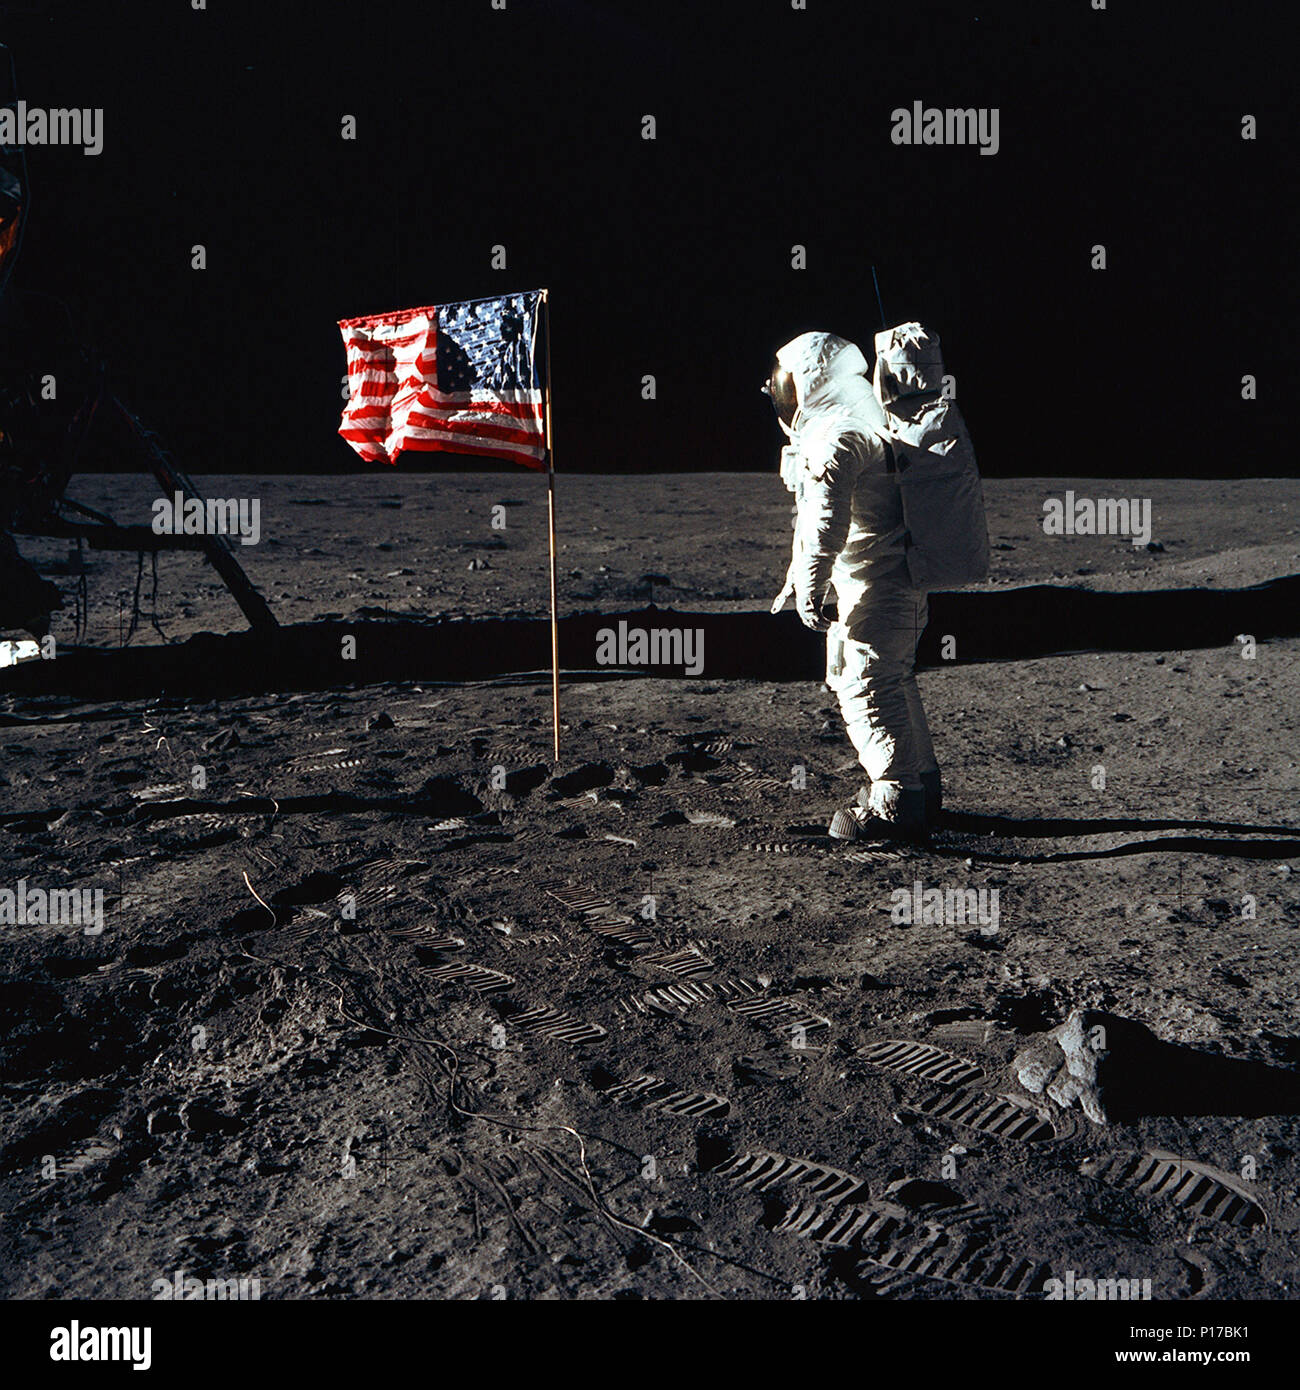 Astronaut Buzz Aldrin, lunar module pilot of the first lunar landing mission, poses for a photograph beside the deployed United States flag during an Apollo 11 Extravehicular Activity (EVA) on the lunar surface. The Lunar Module (LM) is on the left, and the footprints of the astronauts are clearly visible in the soil of the Moon. Astronaut Neil A. Armstrong, commander, took this picture with a 70mm Hasselblad lunar surface camera. While astronauts Armstrong and Aldrin descended in the LM, the 'Eagle', to explore the Sea of Tranquility region of the Moon, astronaut Michael Collins, command modu Stock Photo